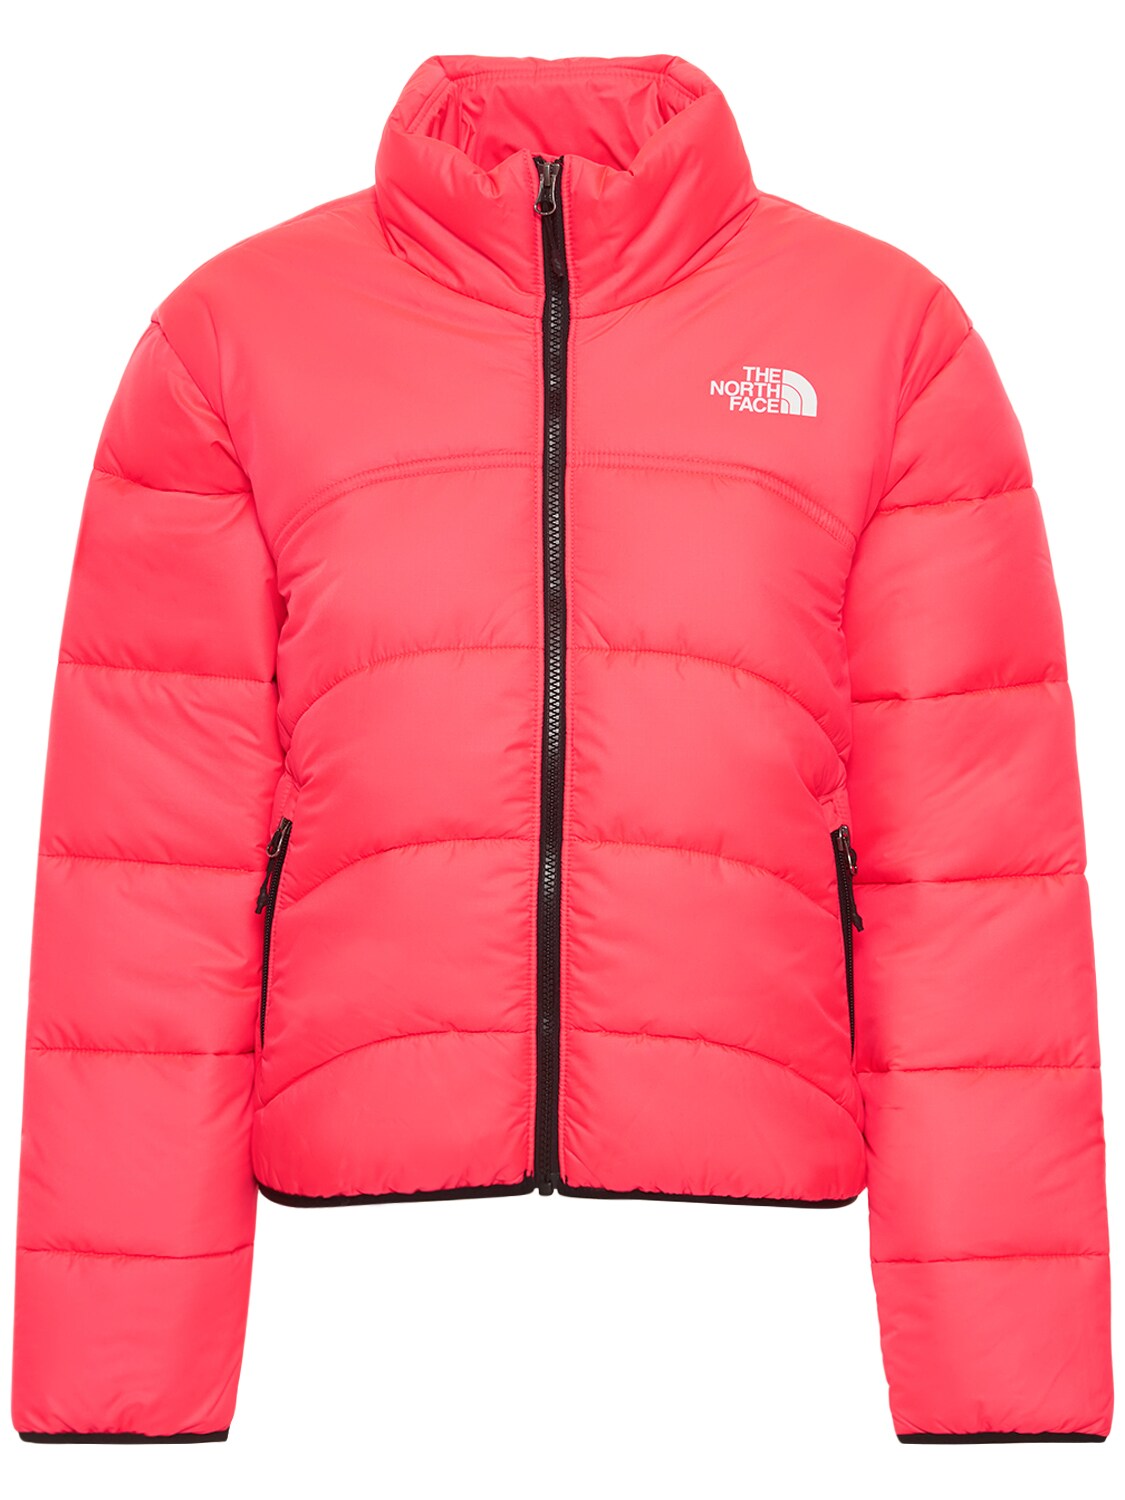 THE NORTH FACE ELEMENTS 2000蓬松夹克